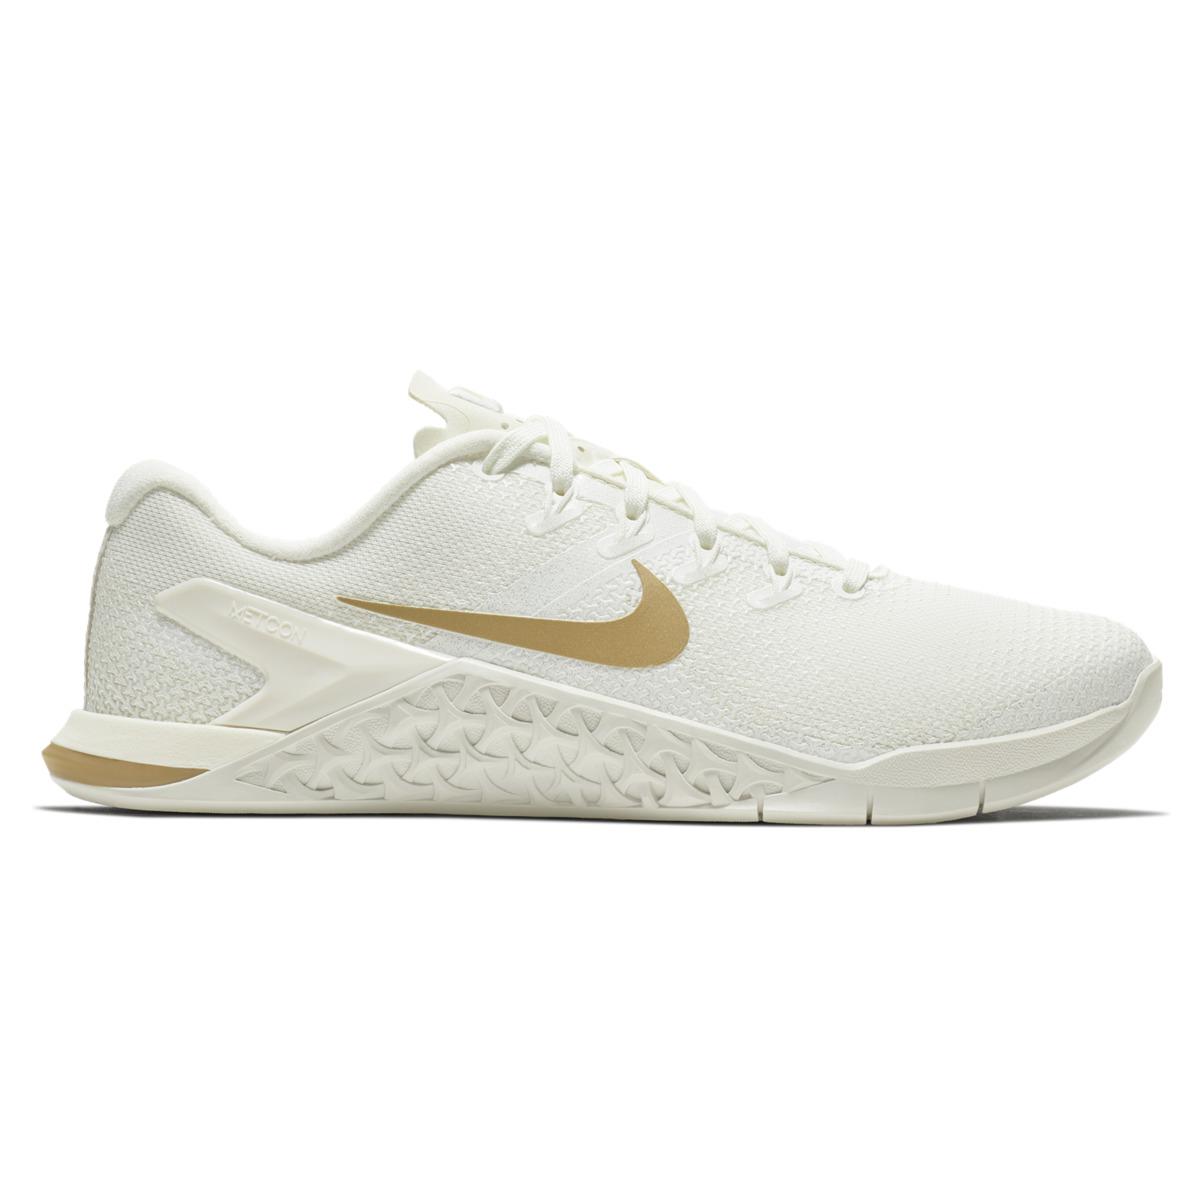 nike metcon white and gold f158d4